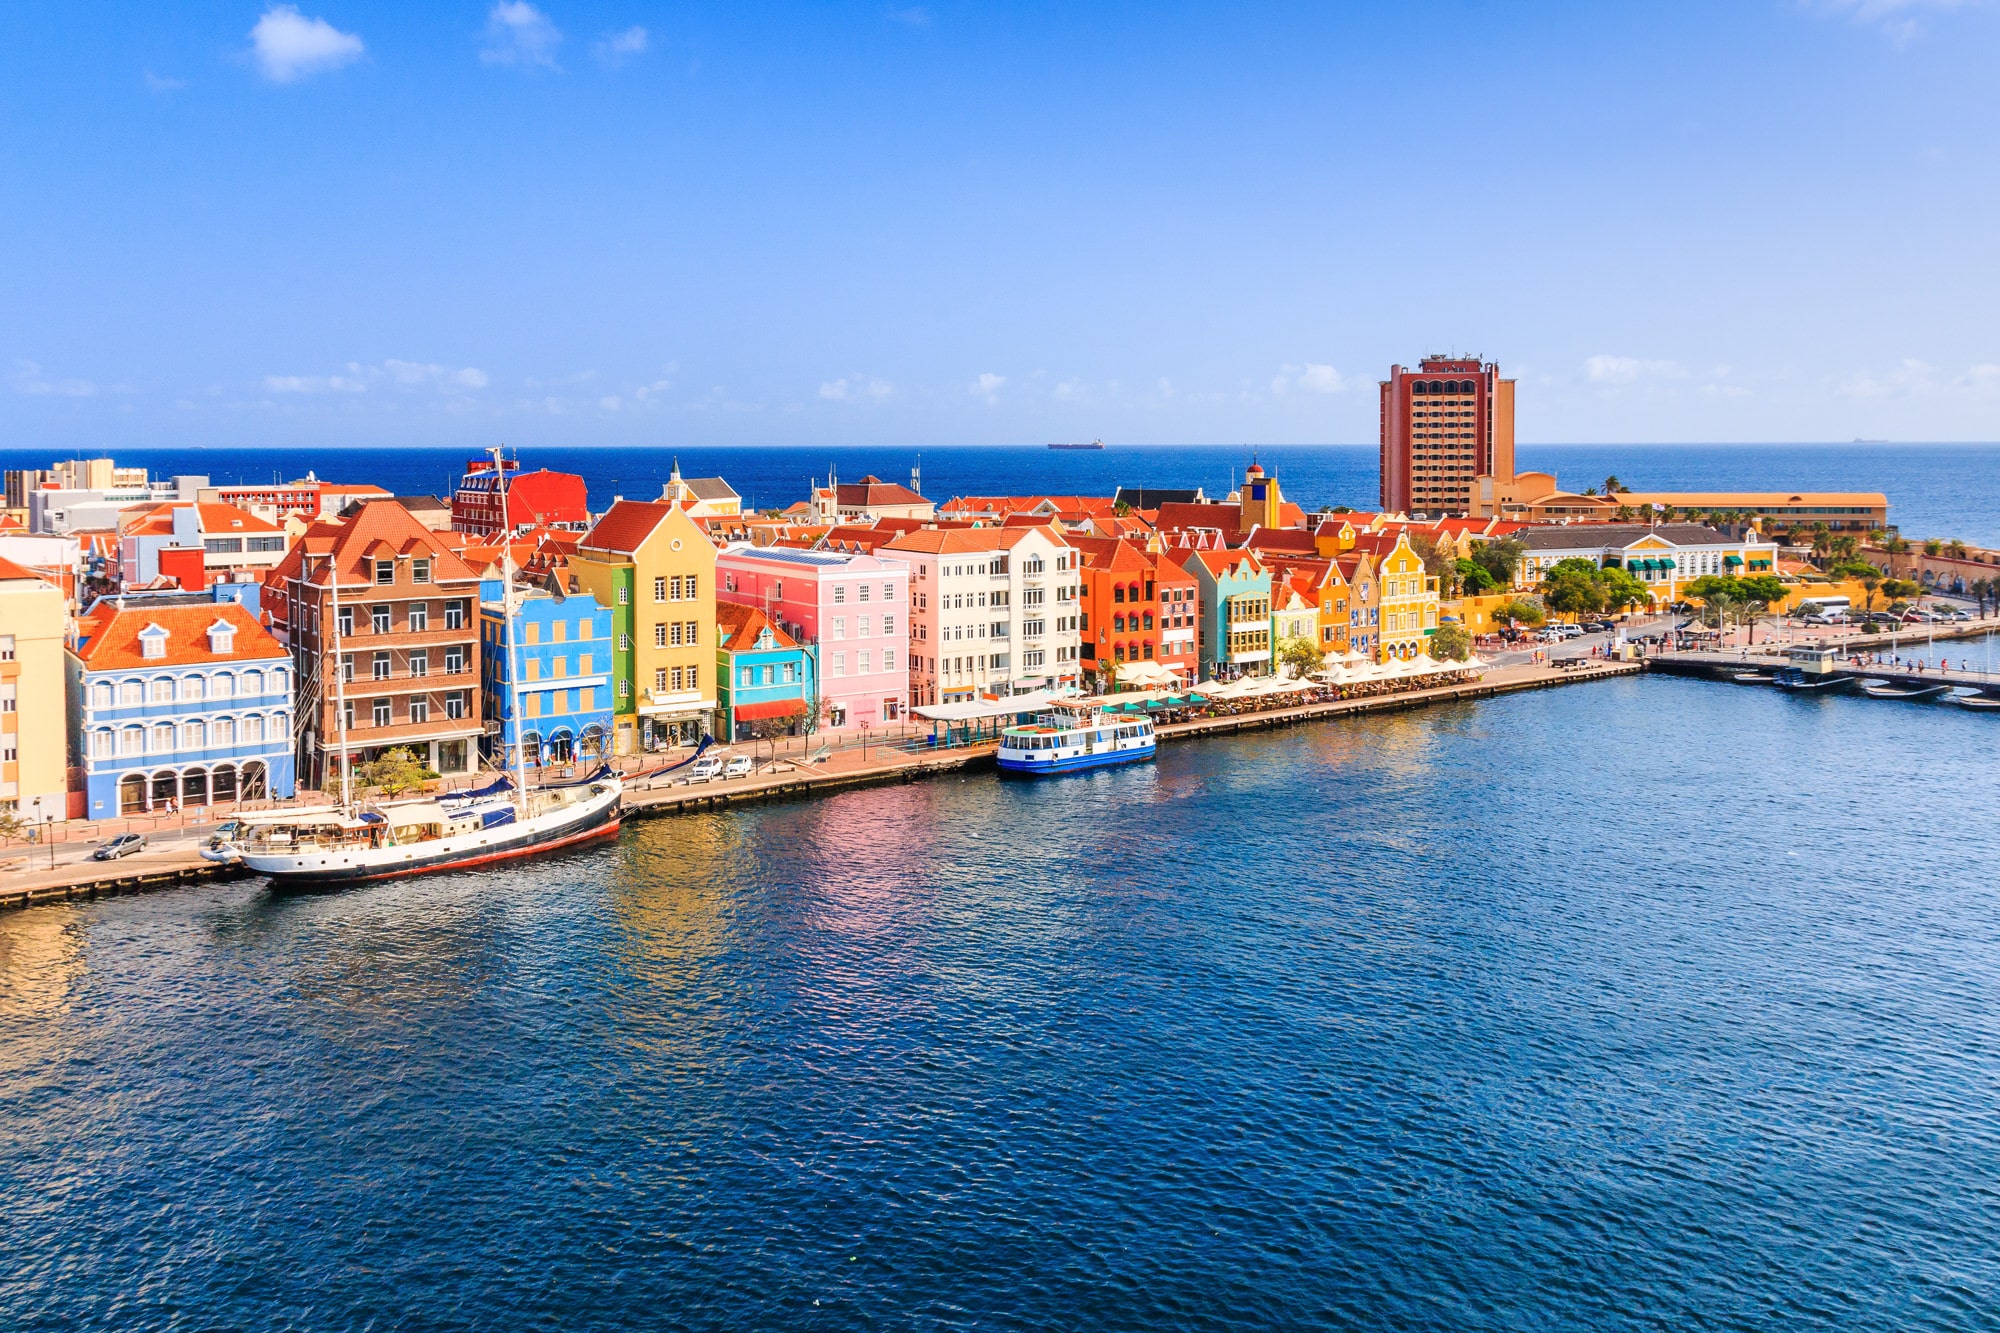 Aerial view - Willemstad, Curacao, Netherlands Antilles